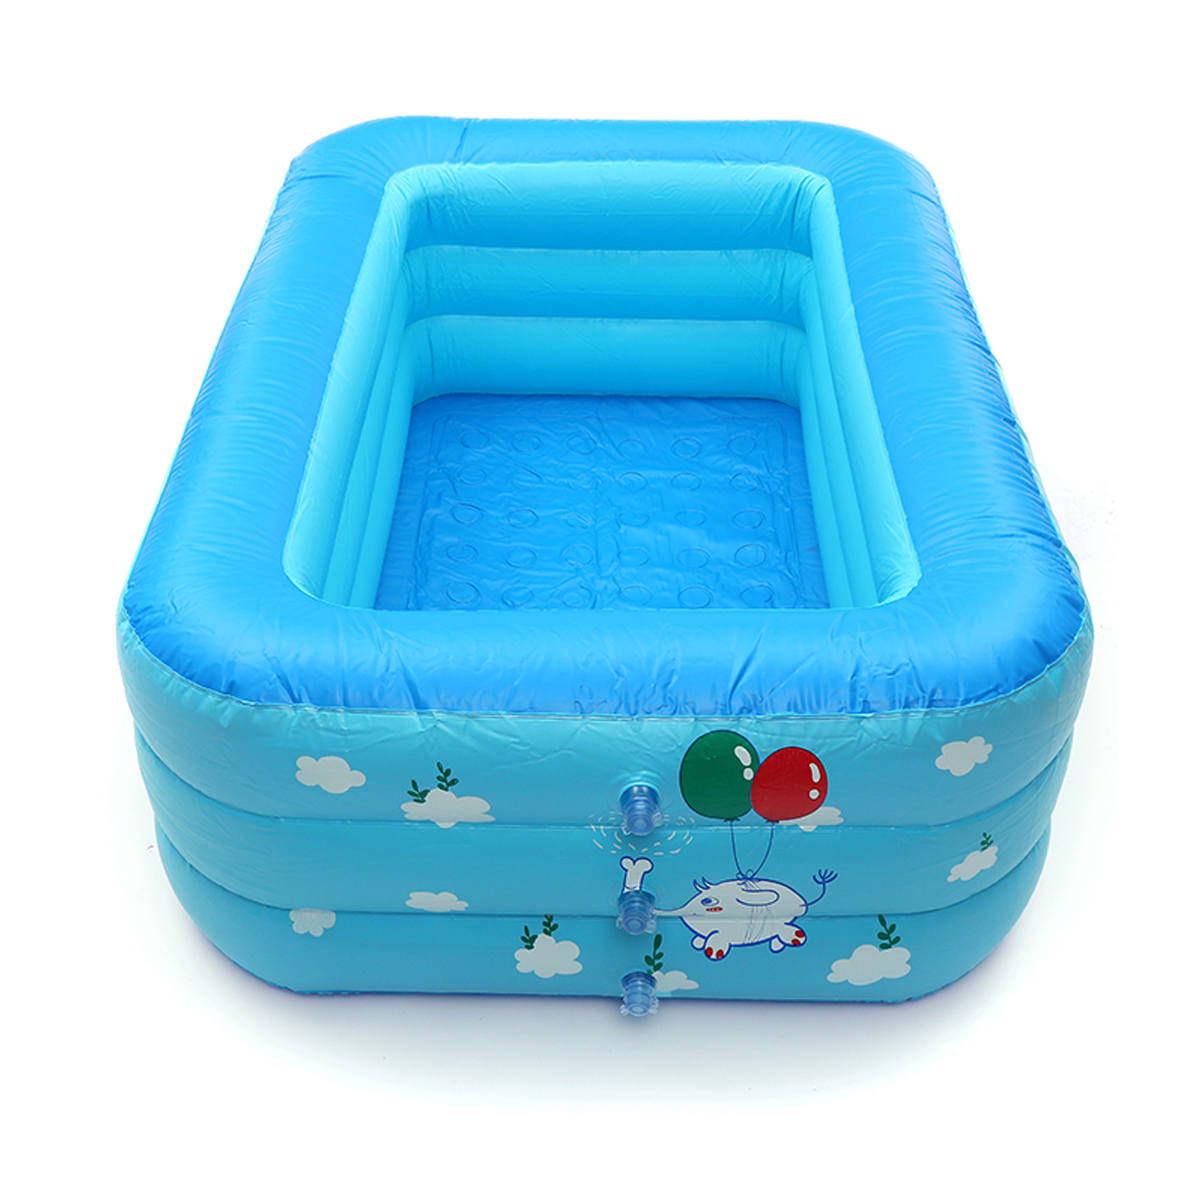 130CM150CM-Inflatable-Swimming-Pool-Outdoor-Summer-Family-Bathing-Pool-Kids-Fun-Play-Water-Pool-1571405-7